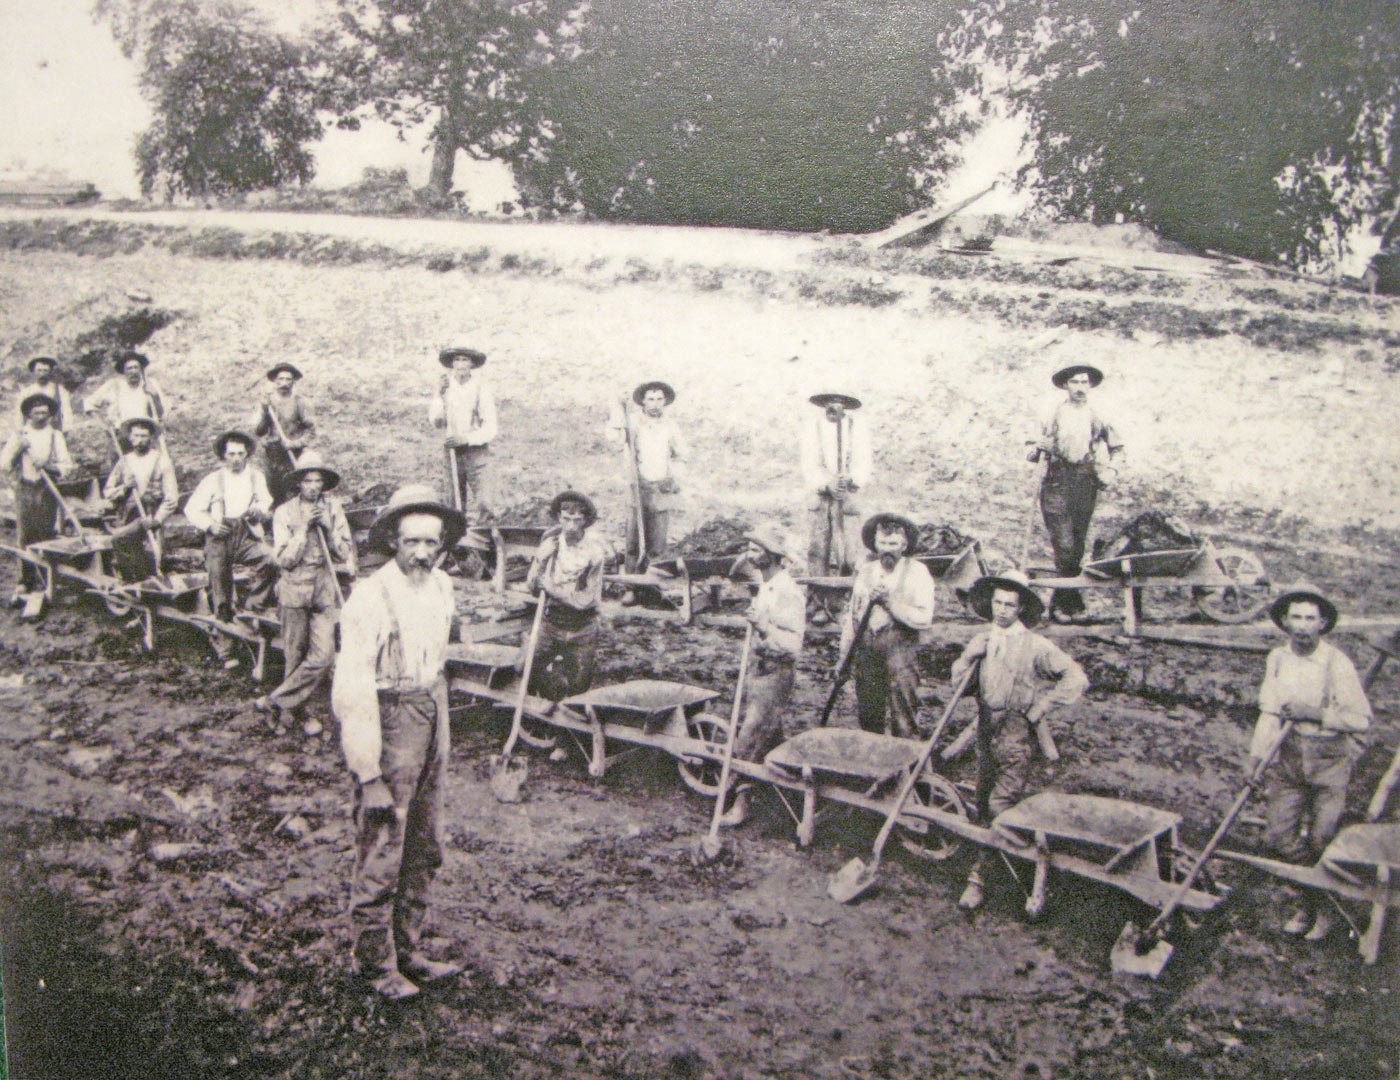 Irish immigrants built the Canal in Indiana using shovels, picks, wheelbarrows, and horse-drawn slip-scoops. By 1837, 1,000 laborers worked on the state's canal system. Accidents, fever, cholera, fights, and snakebites took a heavy toll on the workforce. The toll in lives from building the Canal was contested by some canal historians.